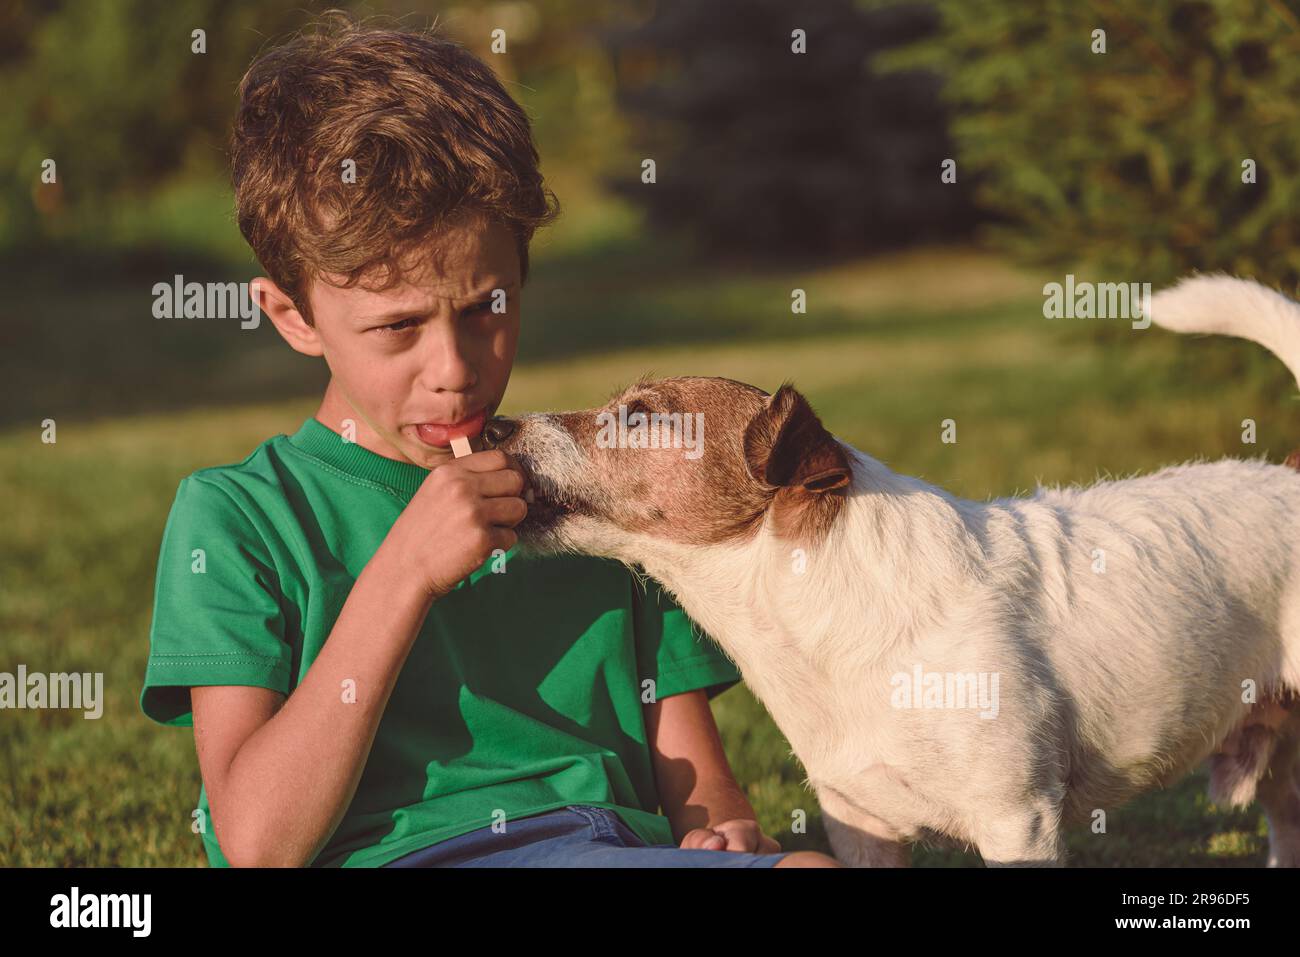 On Summer day kid is eating homemade fruit popsicle on stick and dog begging to share a bite Stock Photo